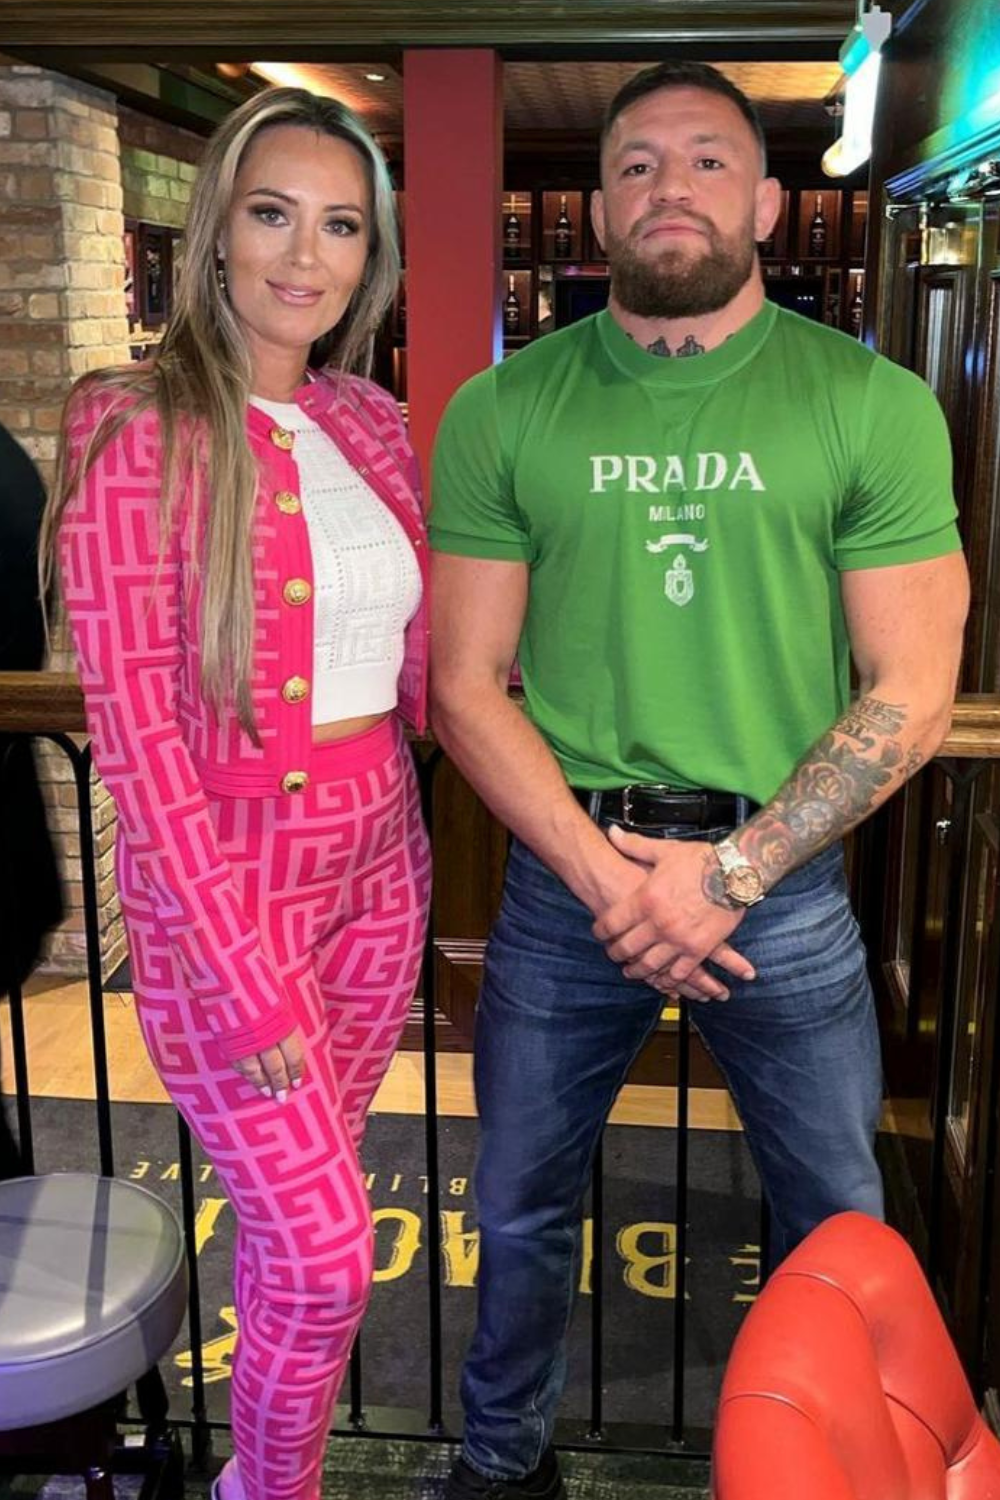 dee and her fiance, Conor McGregor